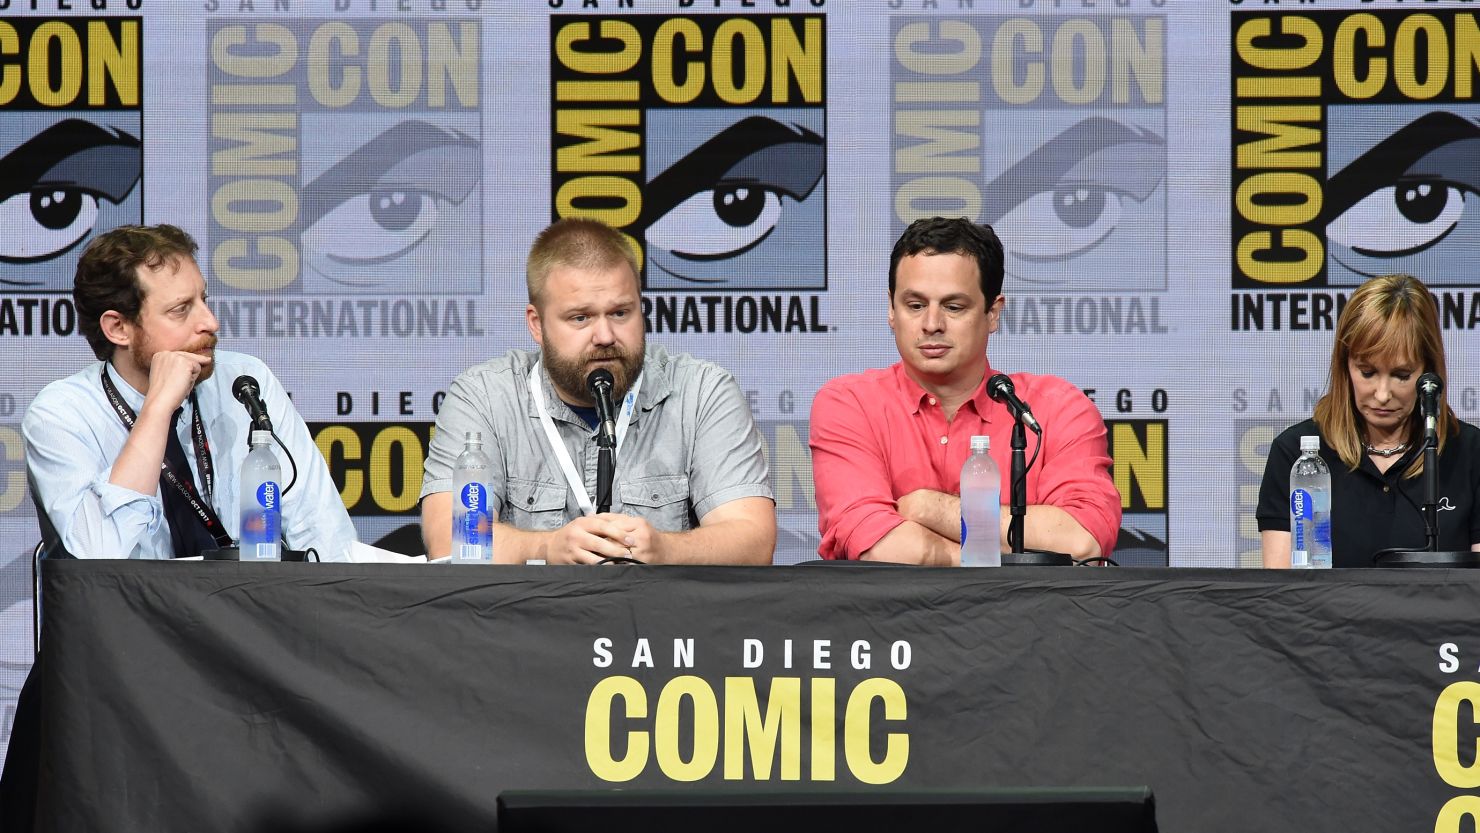 Producers Scott M. Gimple, Robert Kirkman, David Alpert, and Gale Anne Hurd speak onstage speaks onstage at the "The Walking Dead" panel during Comic-Con International 2017 at San Diego Convention Center on July 21, 2017 in San Diego, California. 